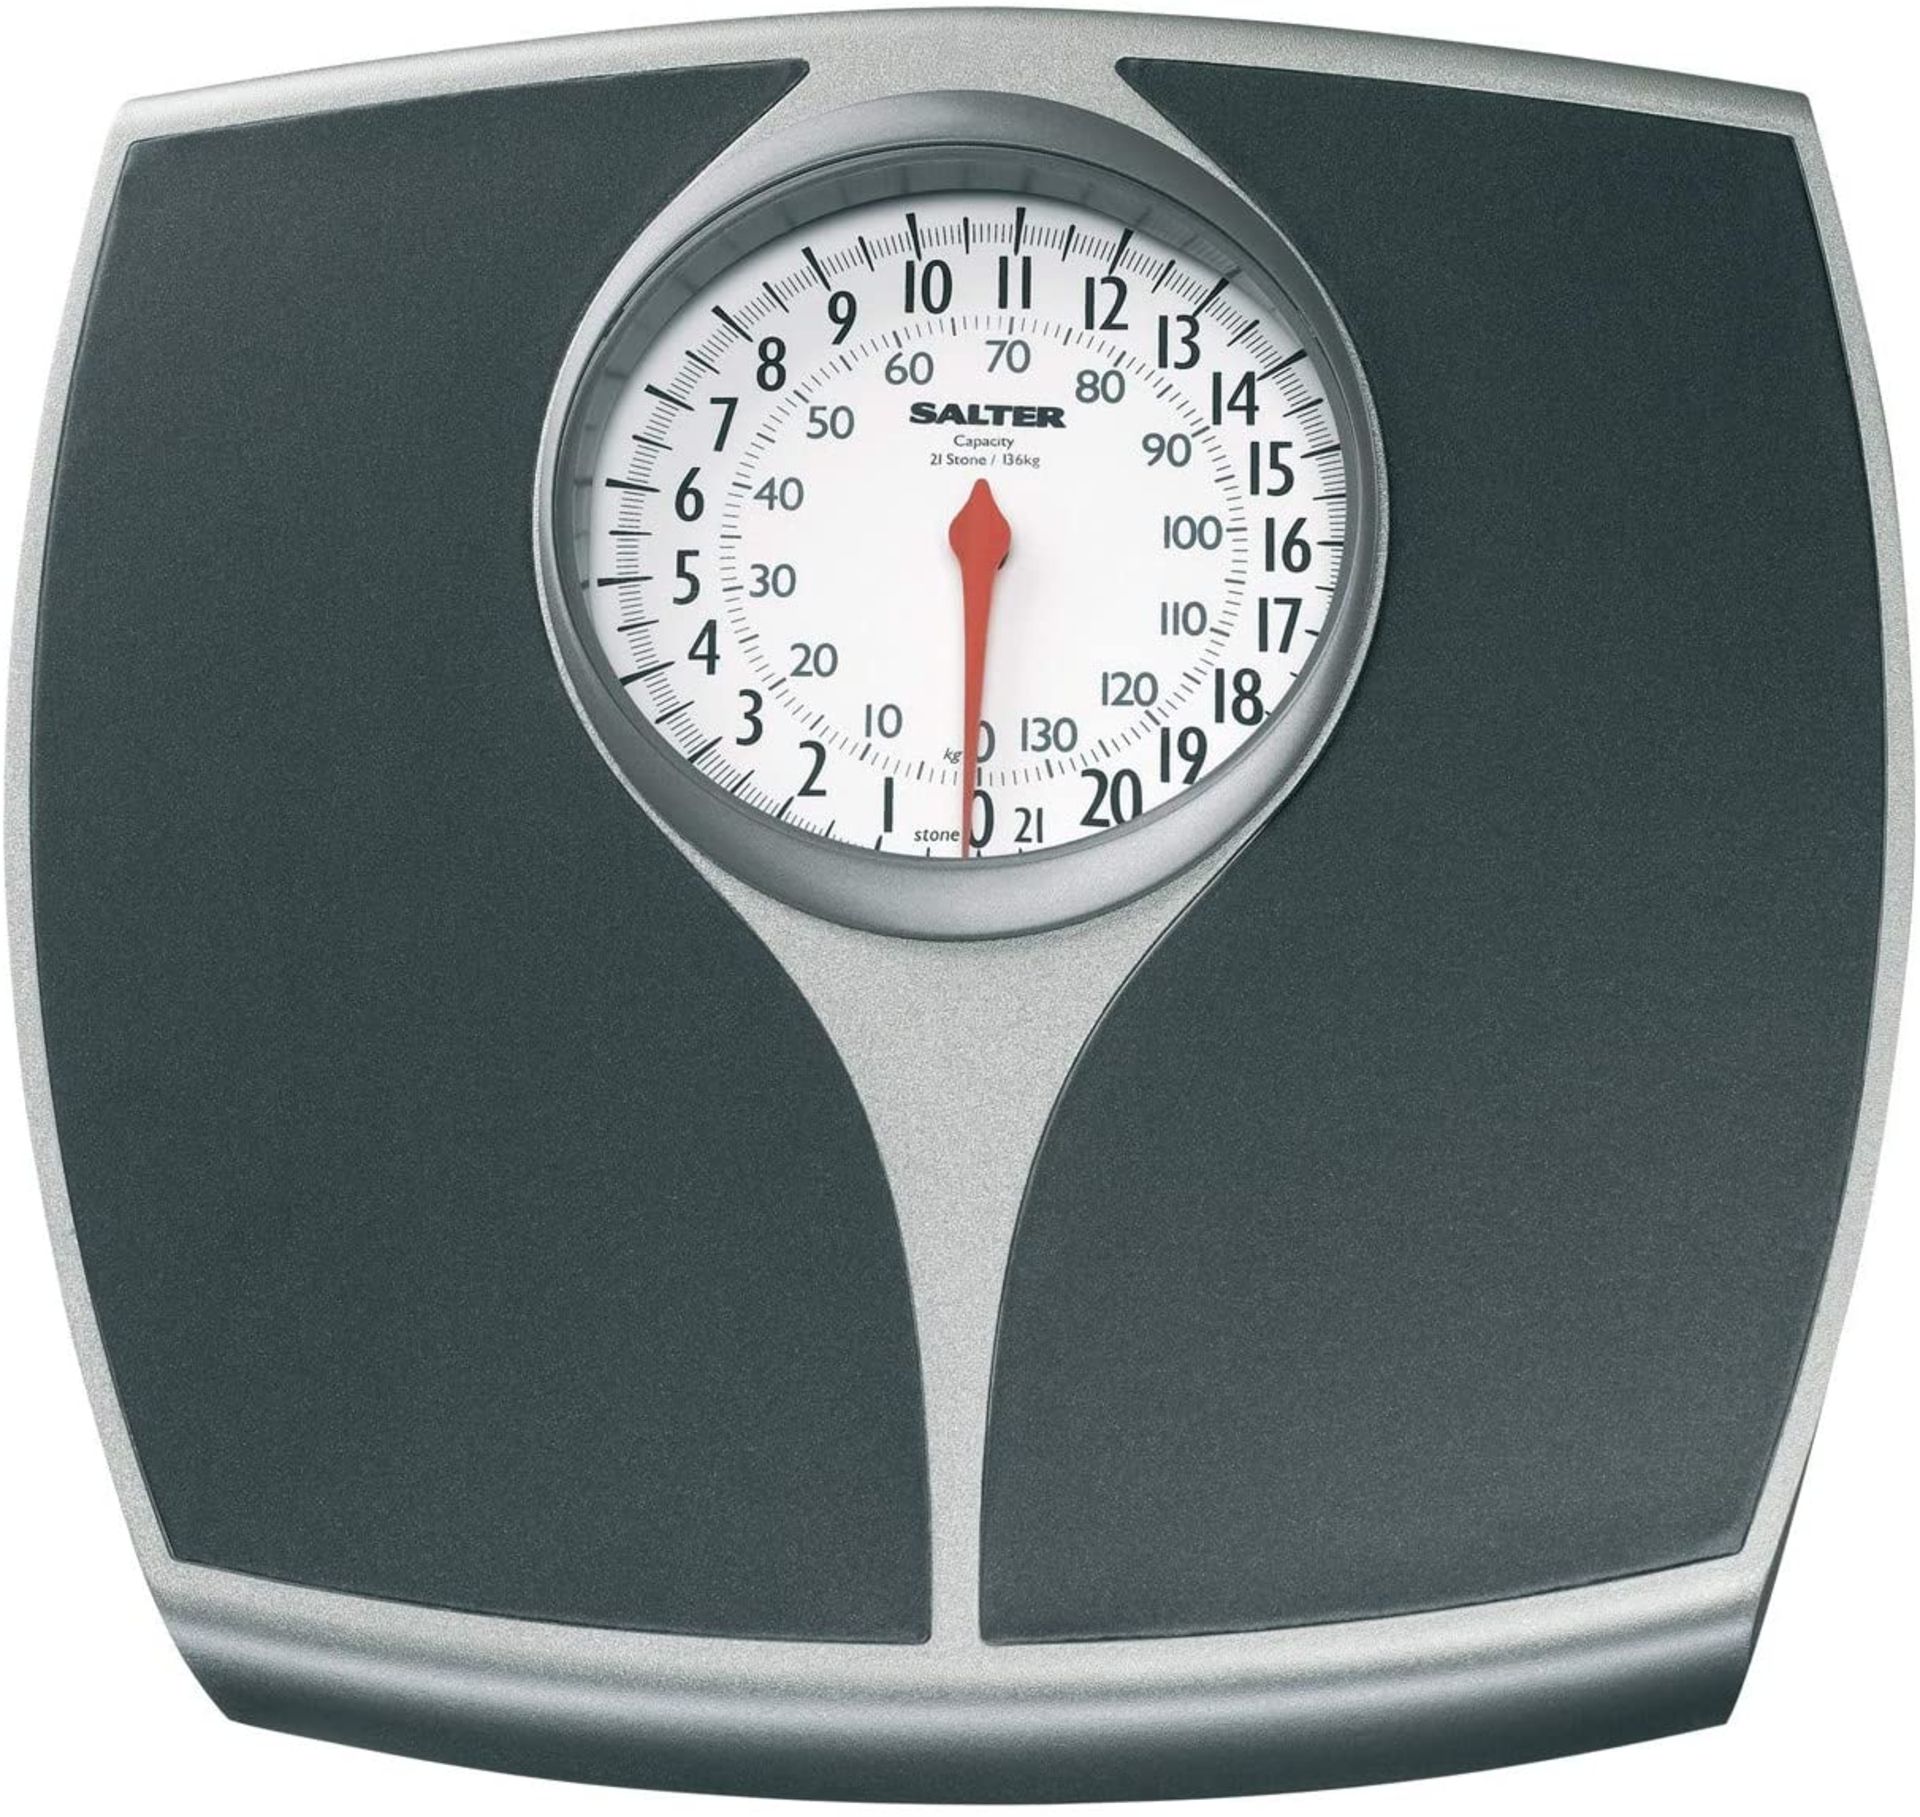 Salter Speedo Mechanical Bathroom Scales - Fast, Accurate and Reliable Weighing, Easy to Read Analog